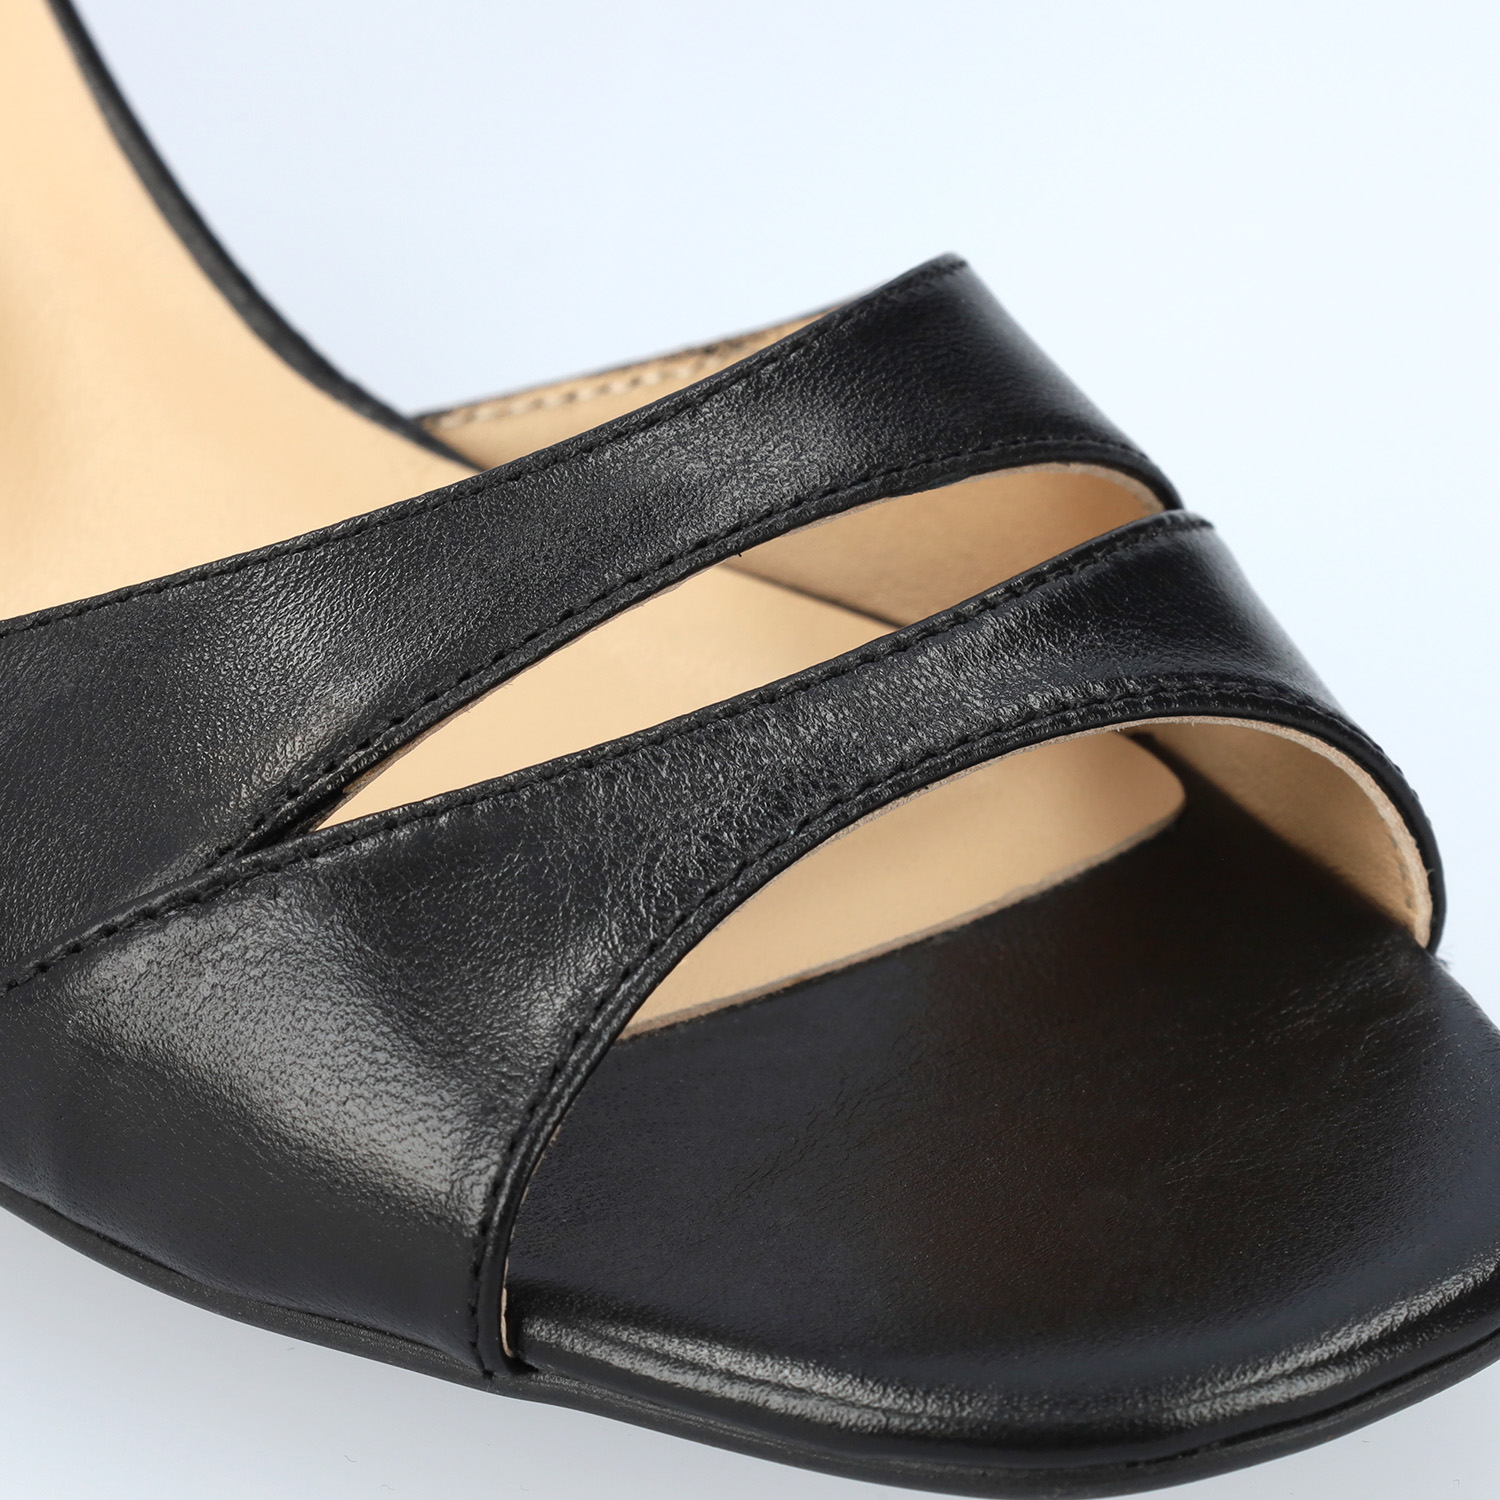 Heeled leather sandals in black colour 